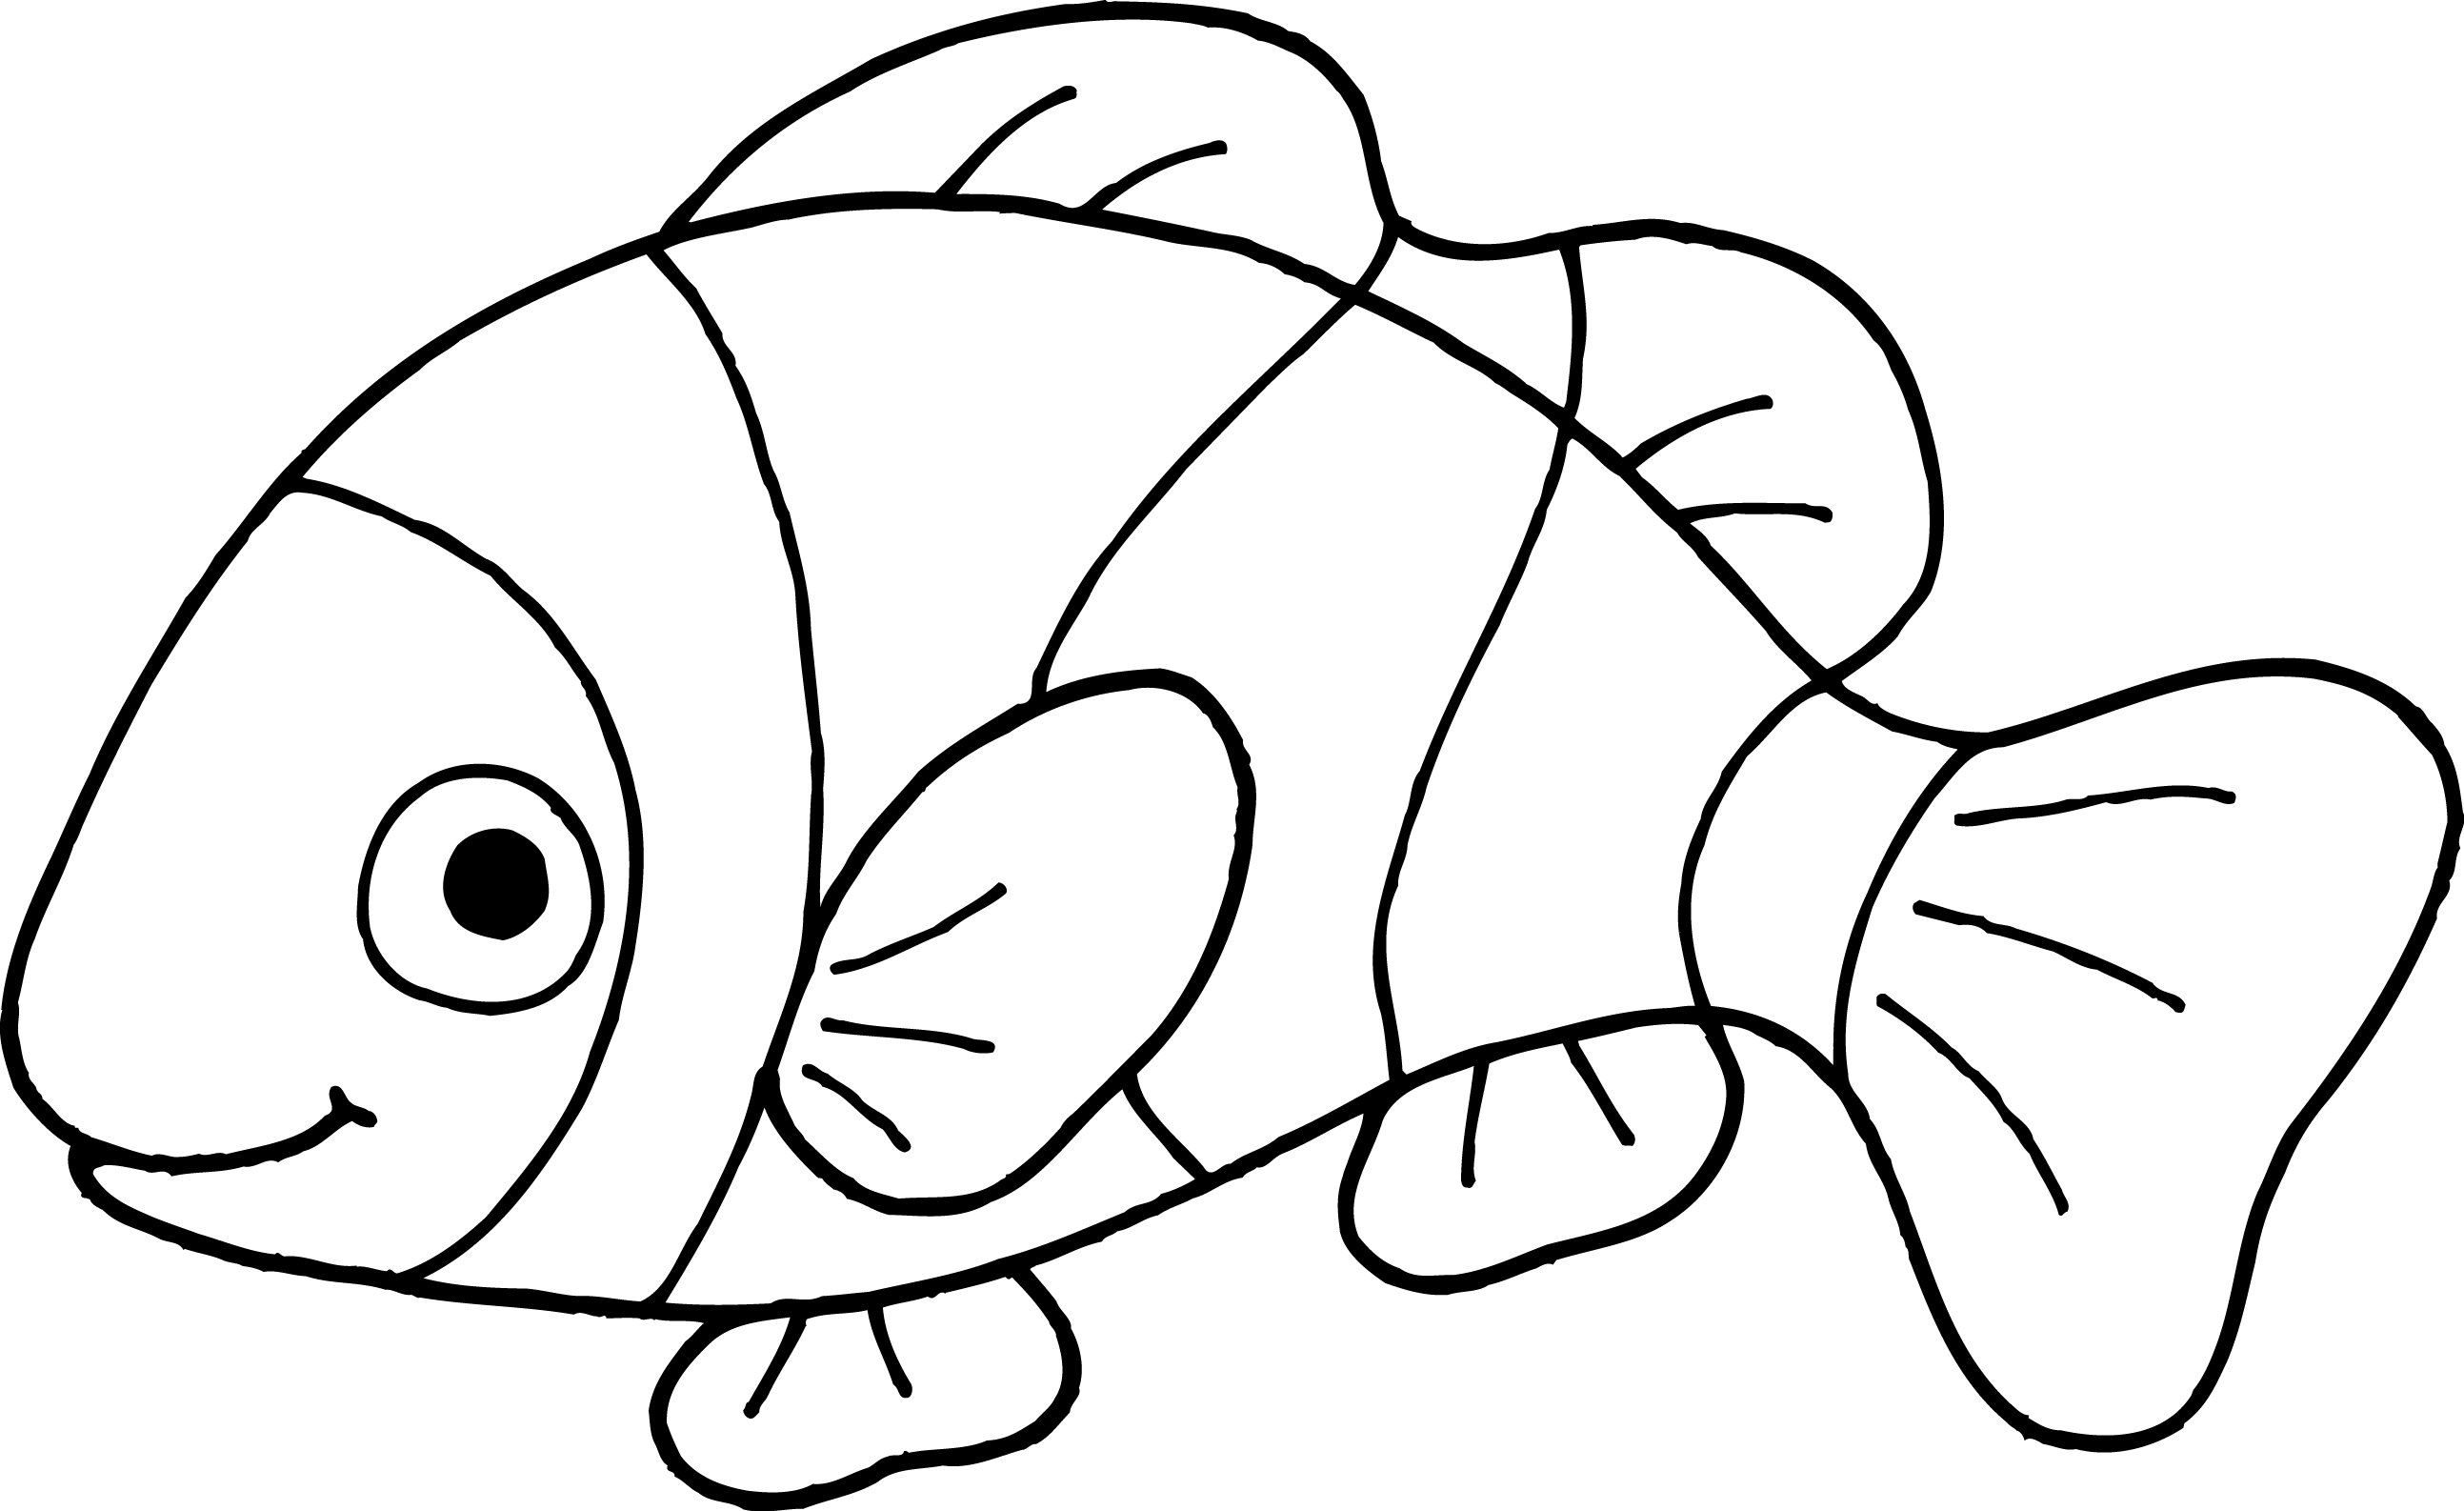 Fish Clip Art Black And White - Clipart library